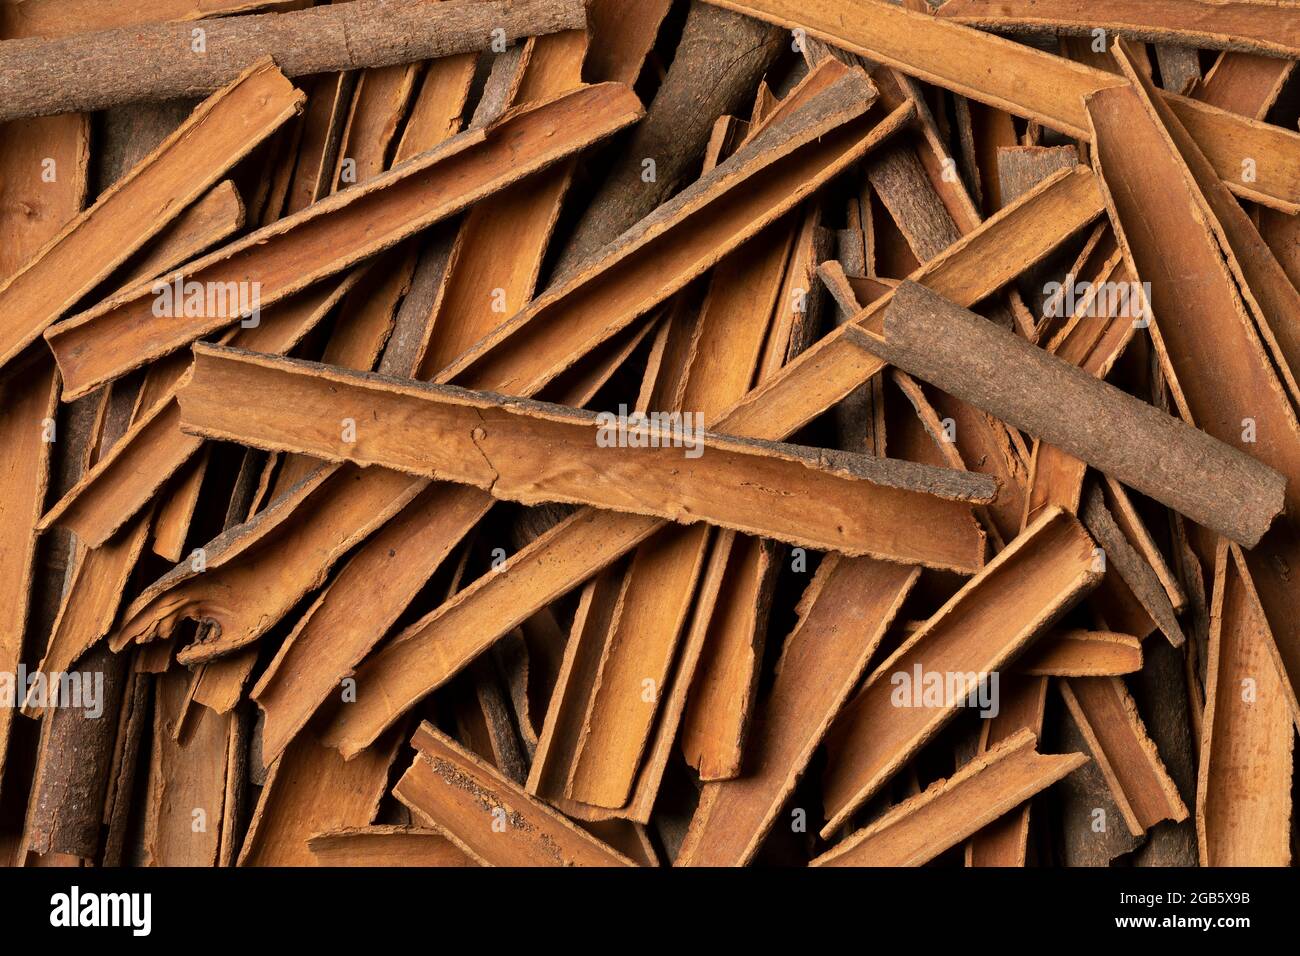 Dried Cinnamon bark close up full frame as a background Stock Photo